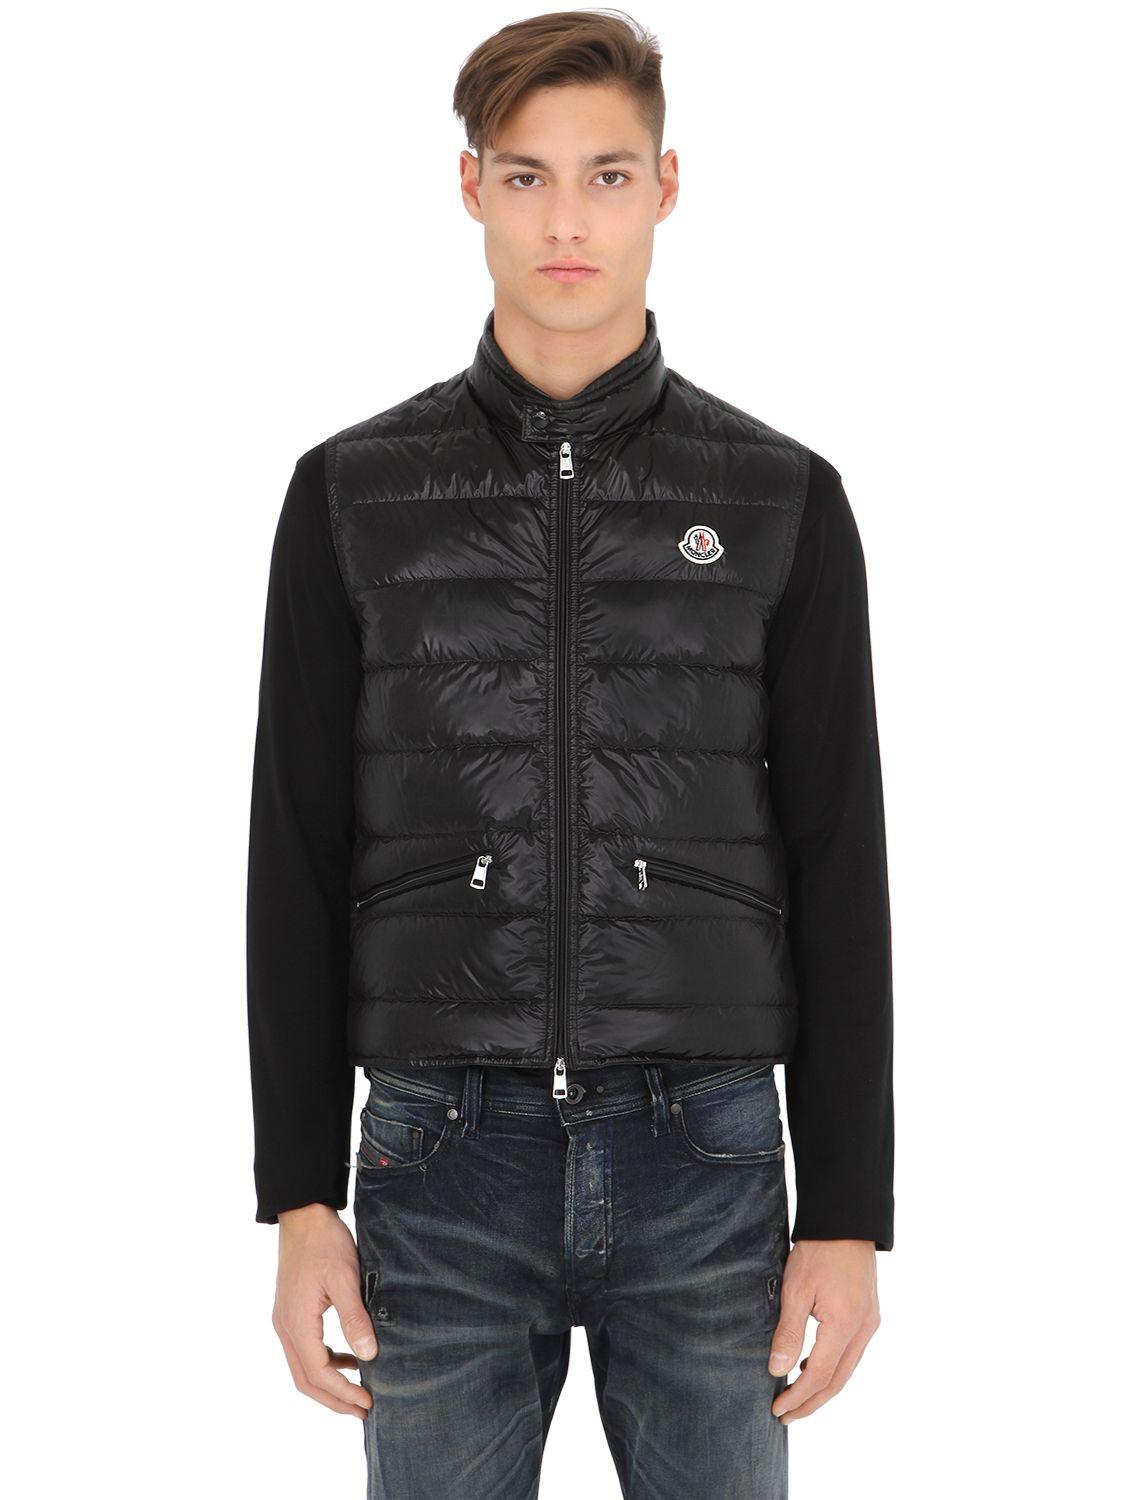 Lyst - Moncler Gui Quilted Nylon Down Vest in Black for Men - Save 14%